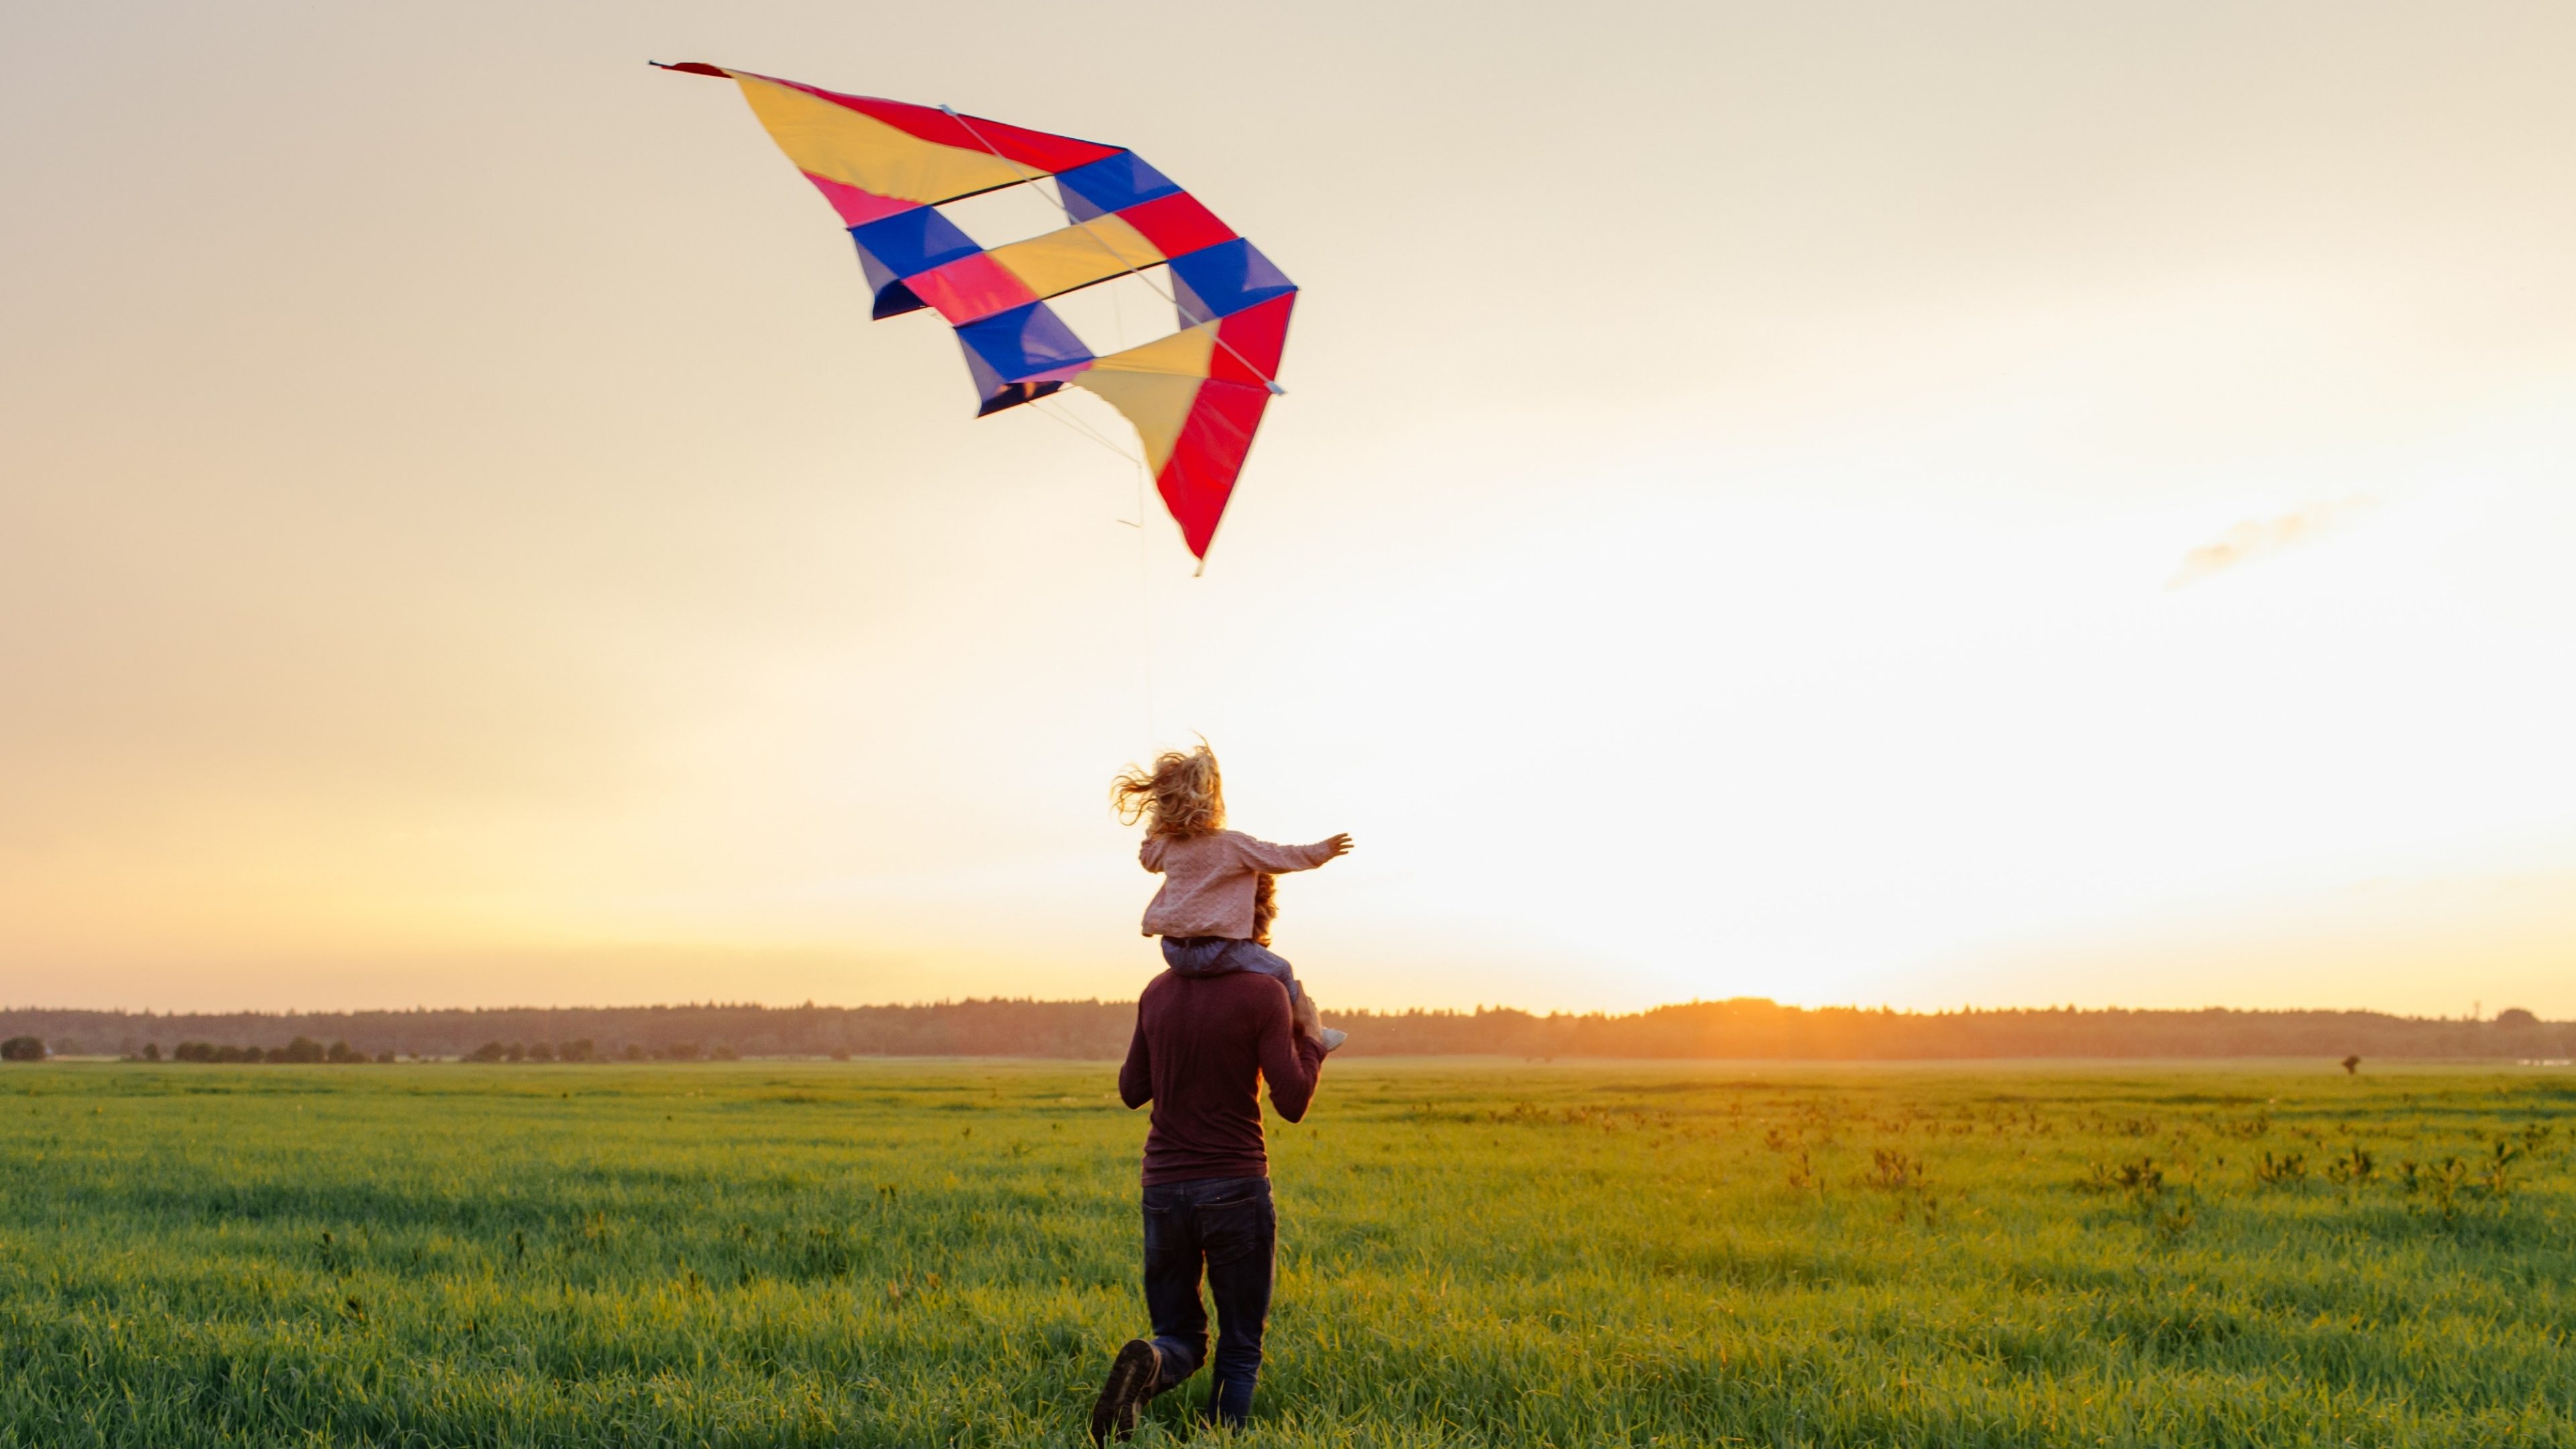 Illustration for Swiss Life Asset Managers Responsible Investment Report: Father and daughter running on a field with a kite